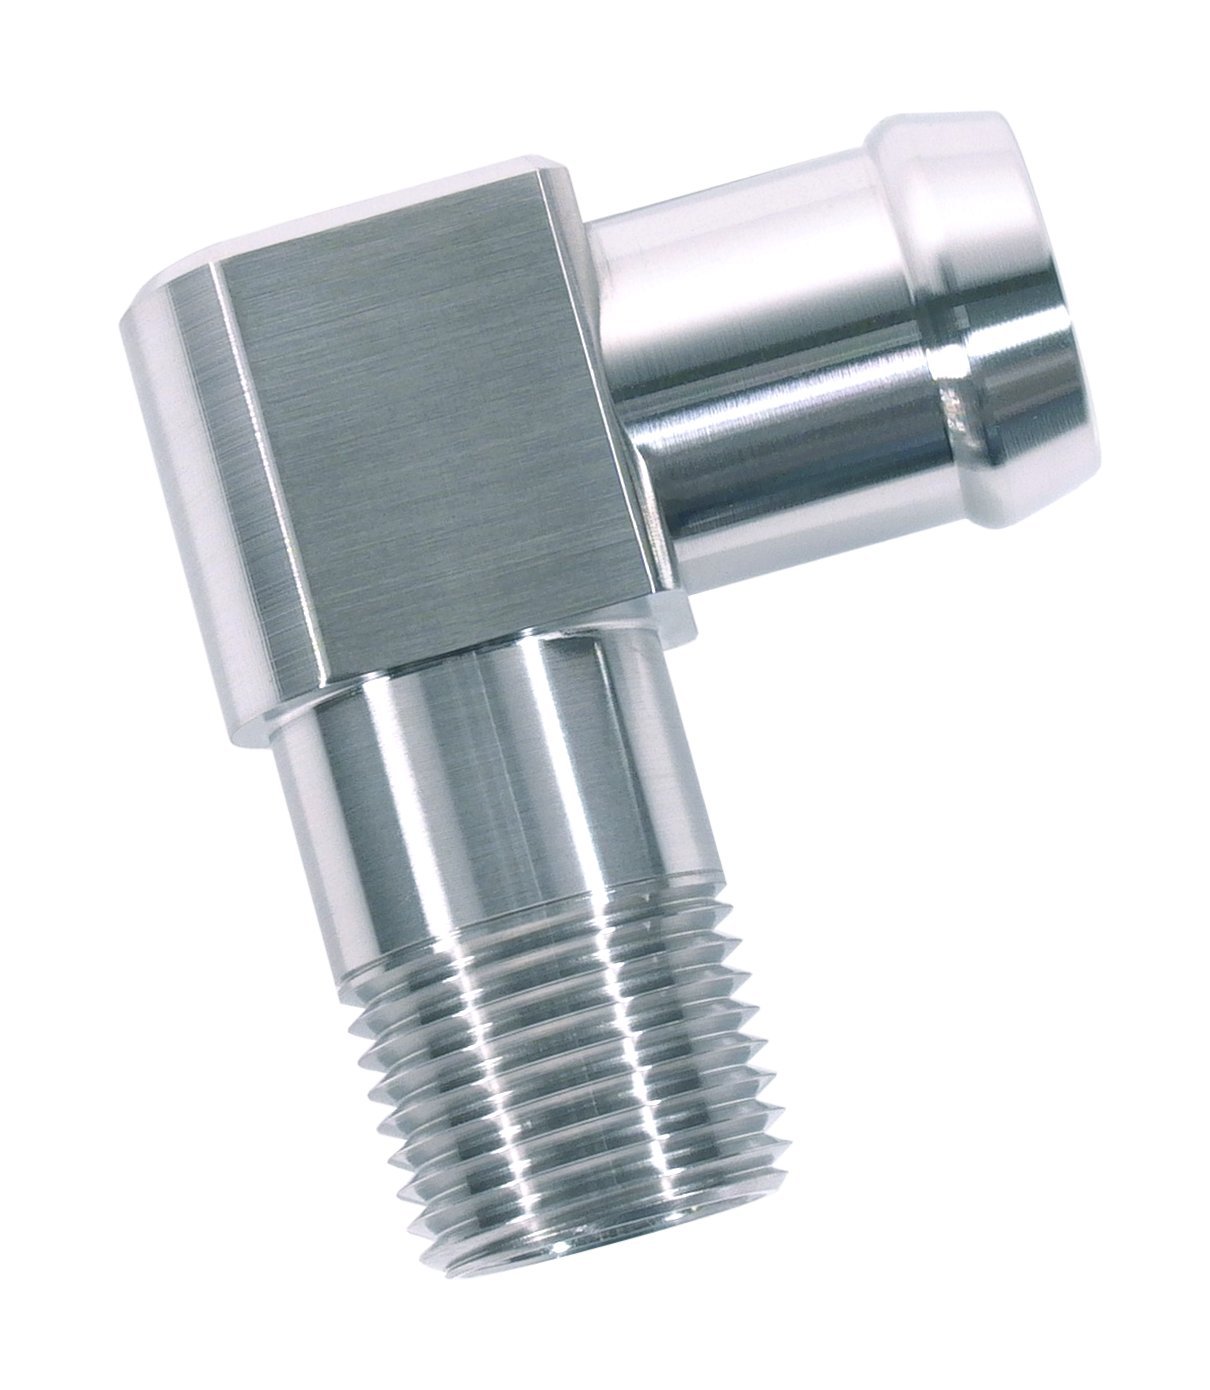 Heater Hose Fitting, 90-Degree, 1/2 in. NPT x 3/4 in. Hose Barb, 2 1/8 in. Length [Polished Finish]